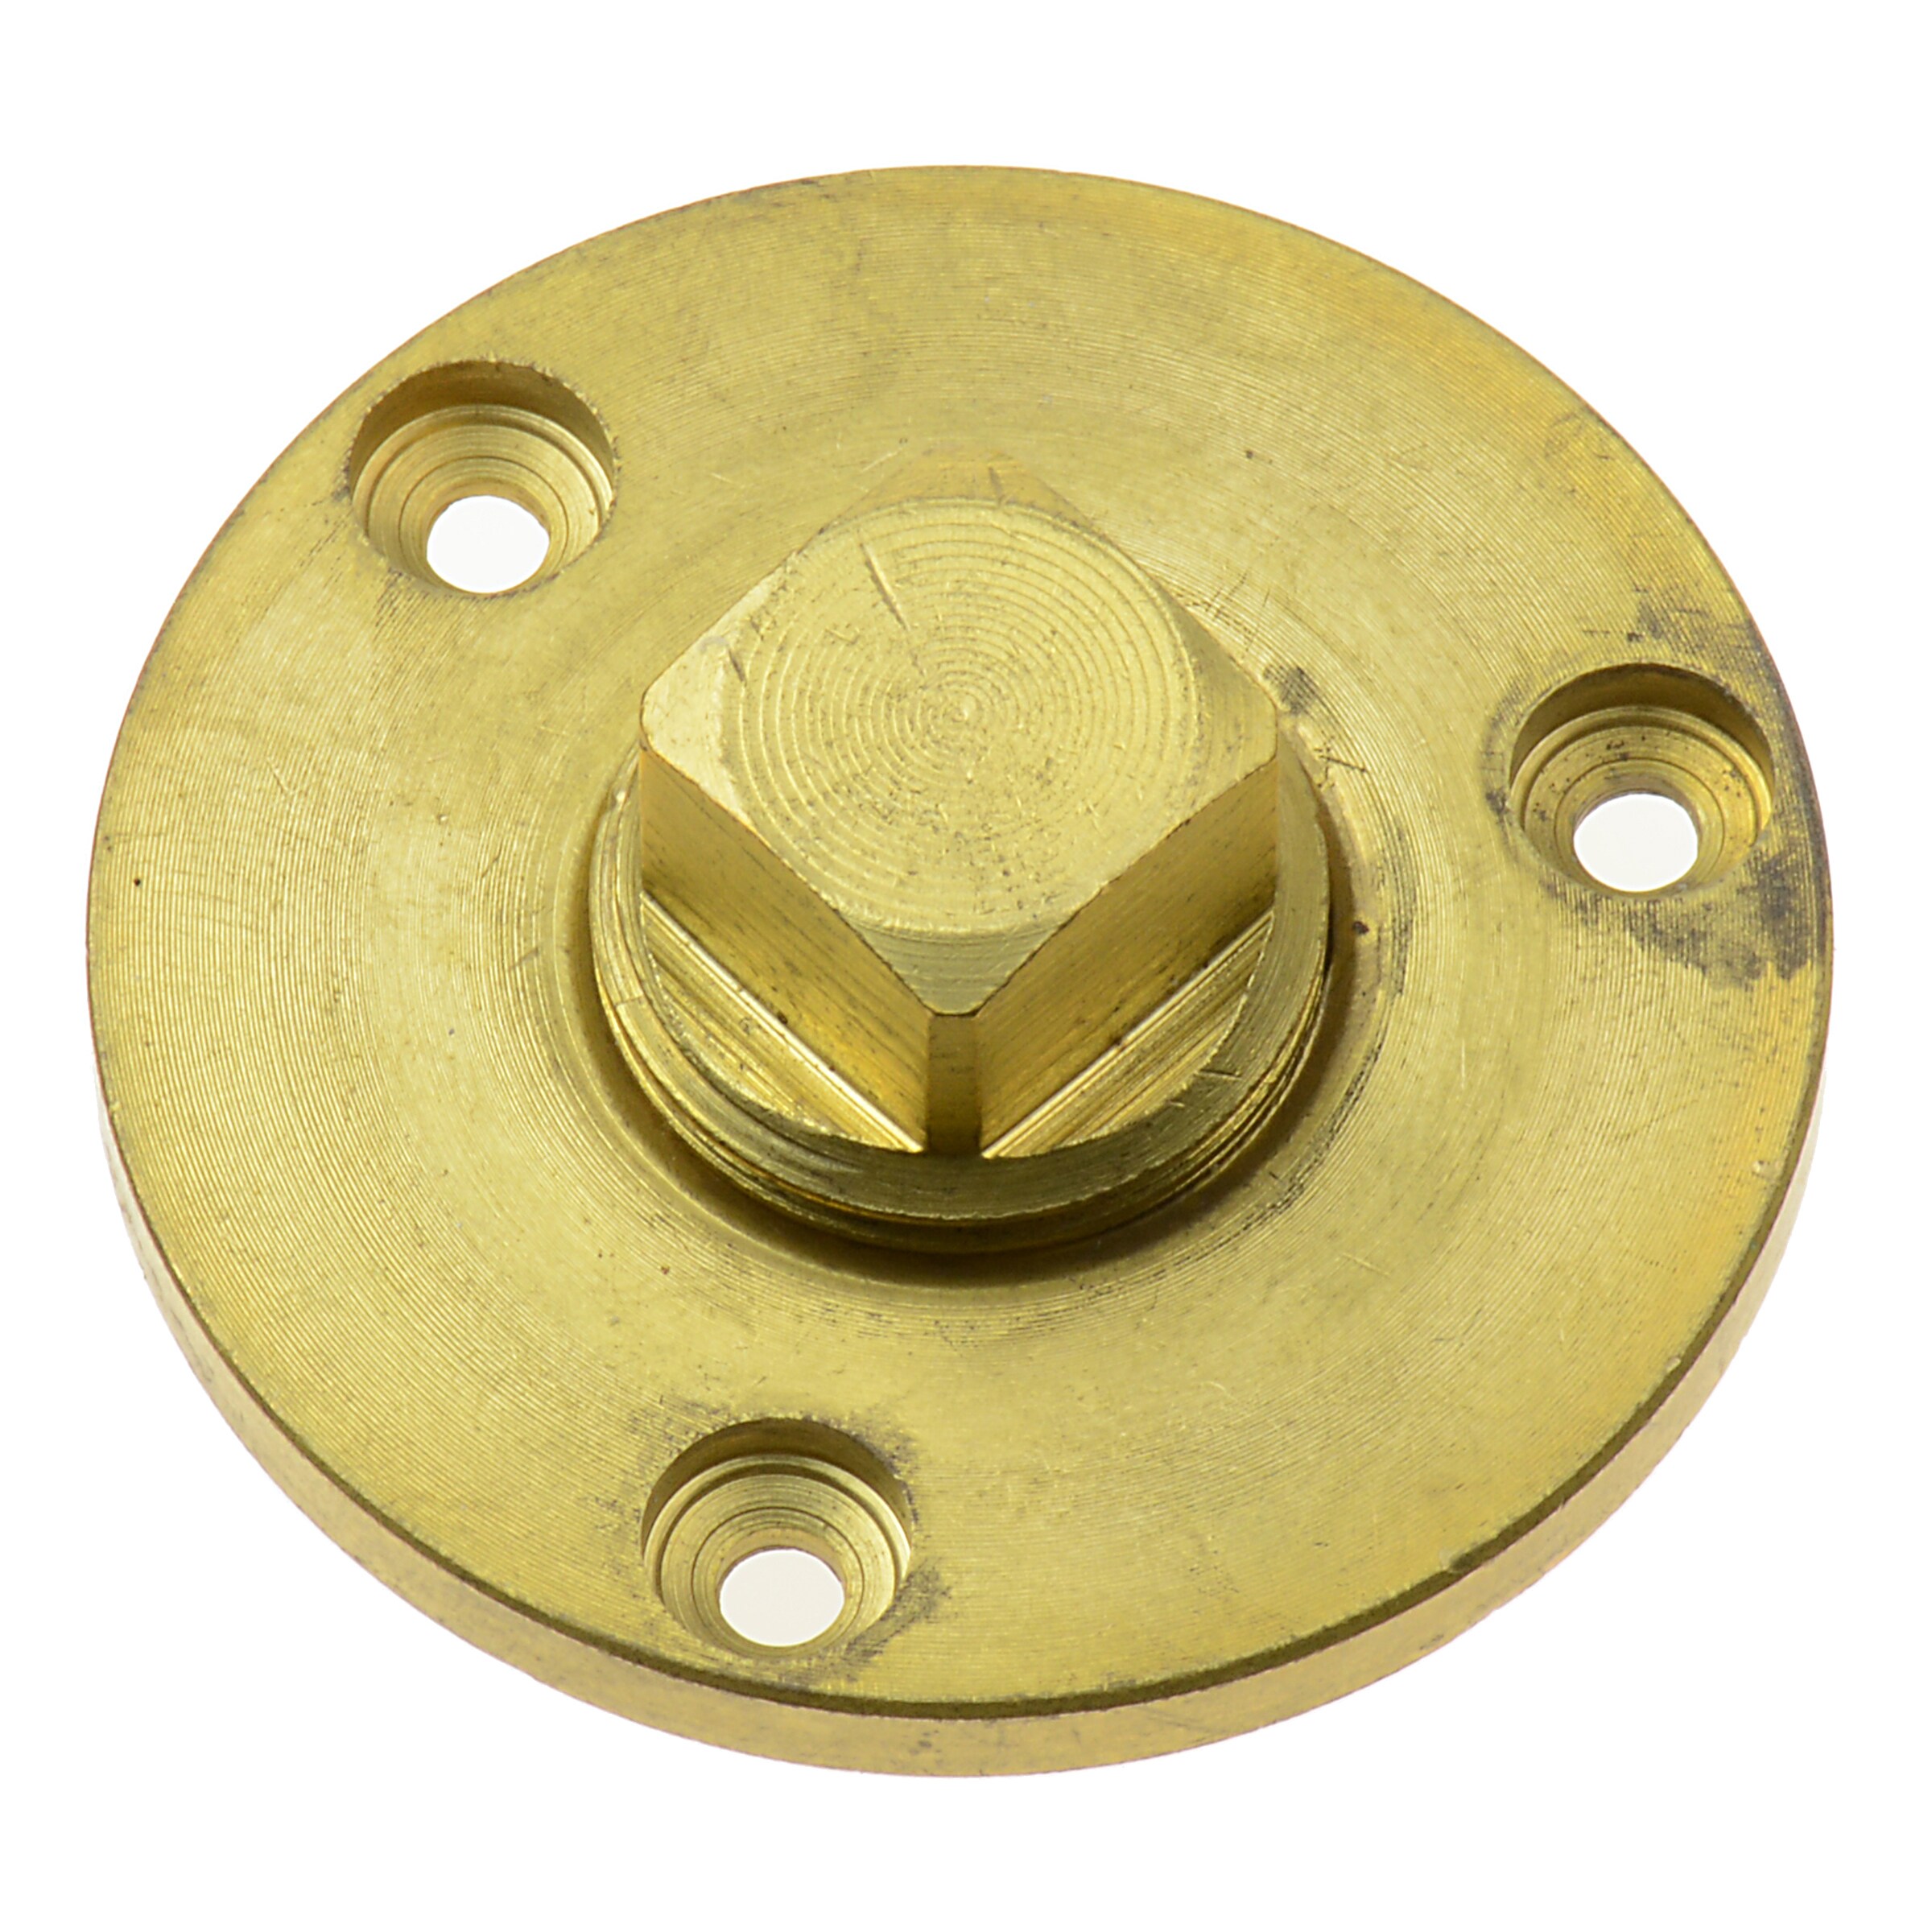 T-H Marine Brass Garrboard Drain and Plug - Garboard Drain Plug Kit with  Flange - Boat Hardware in the Boat Hardware department at